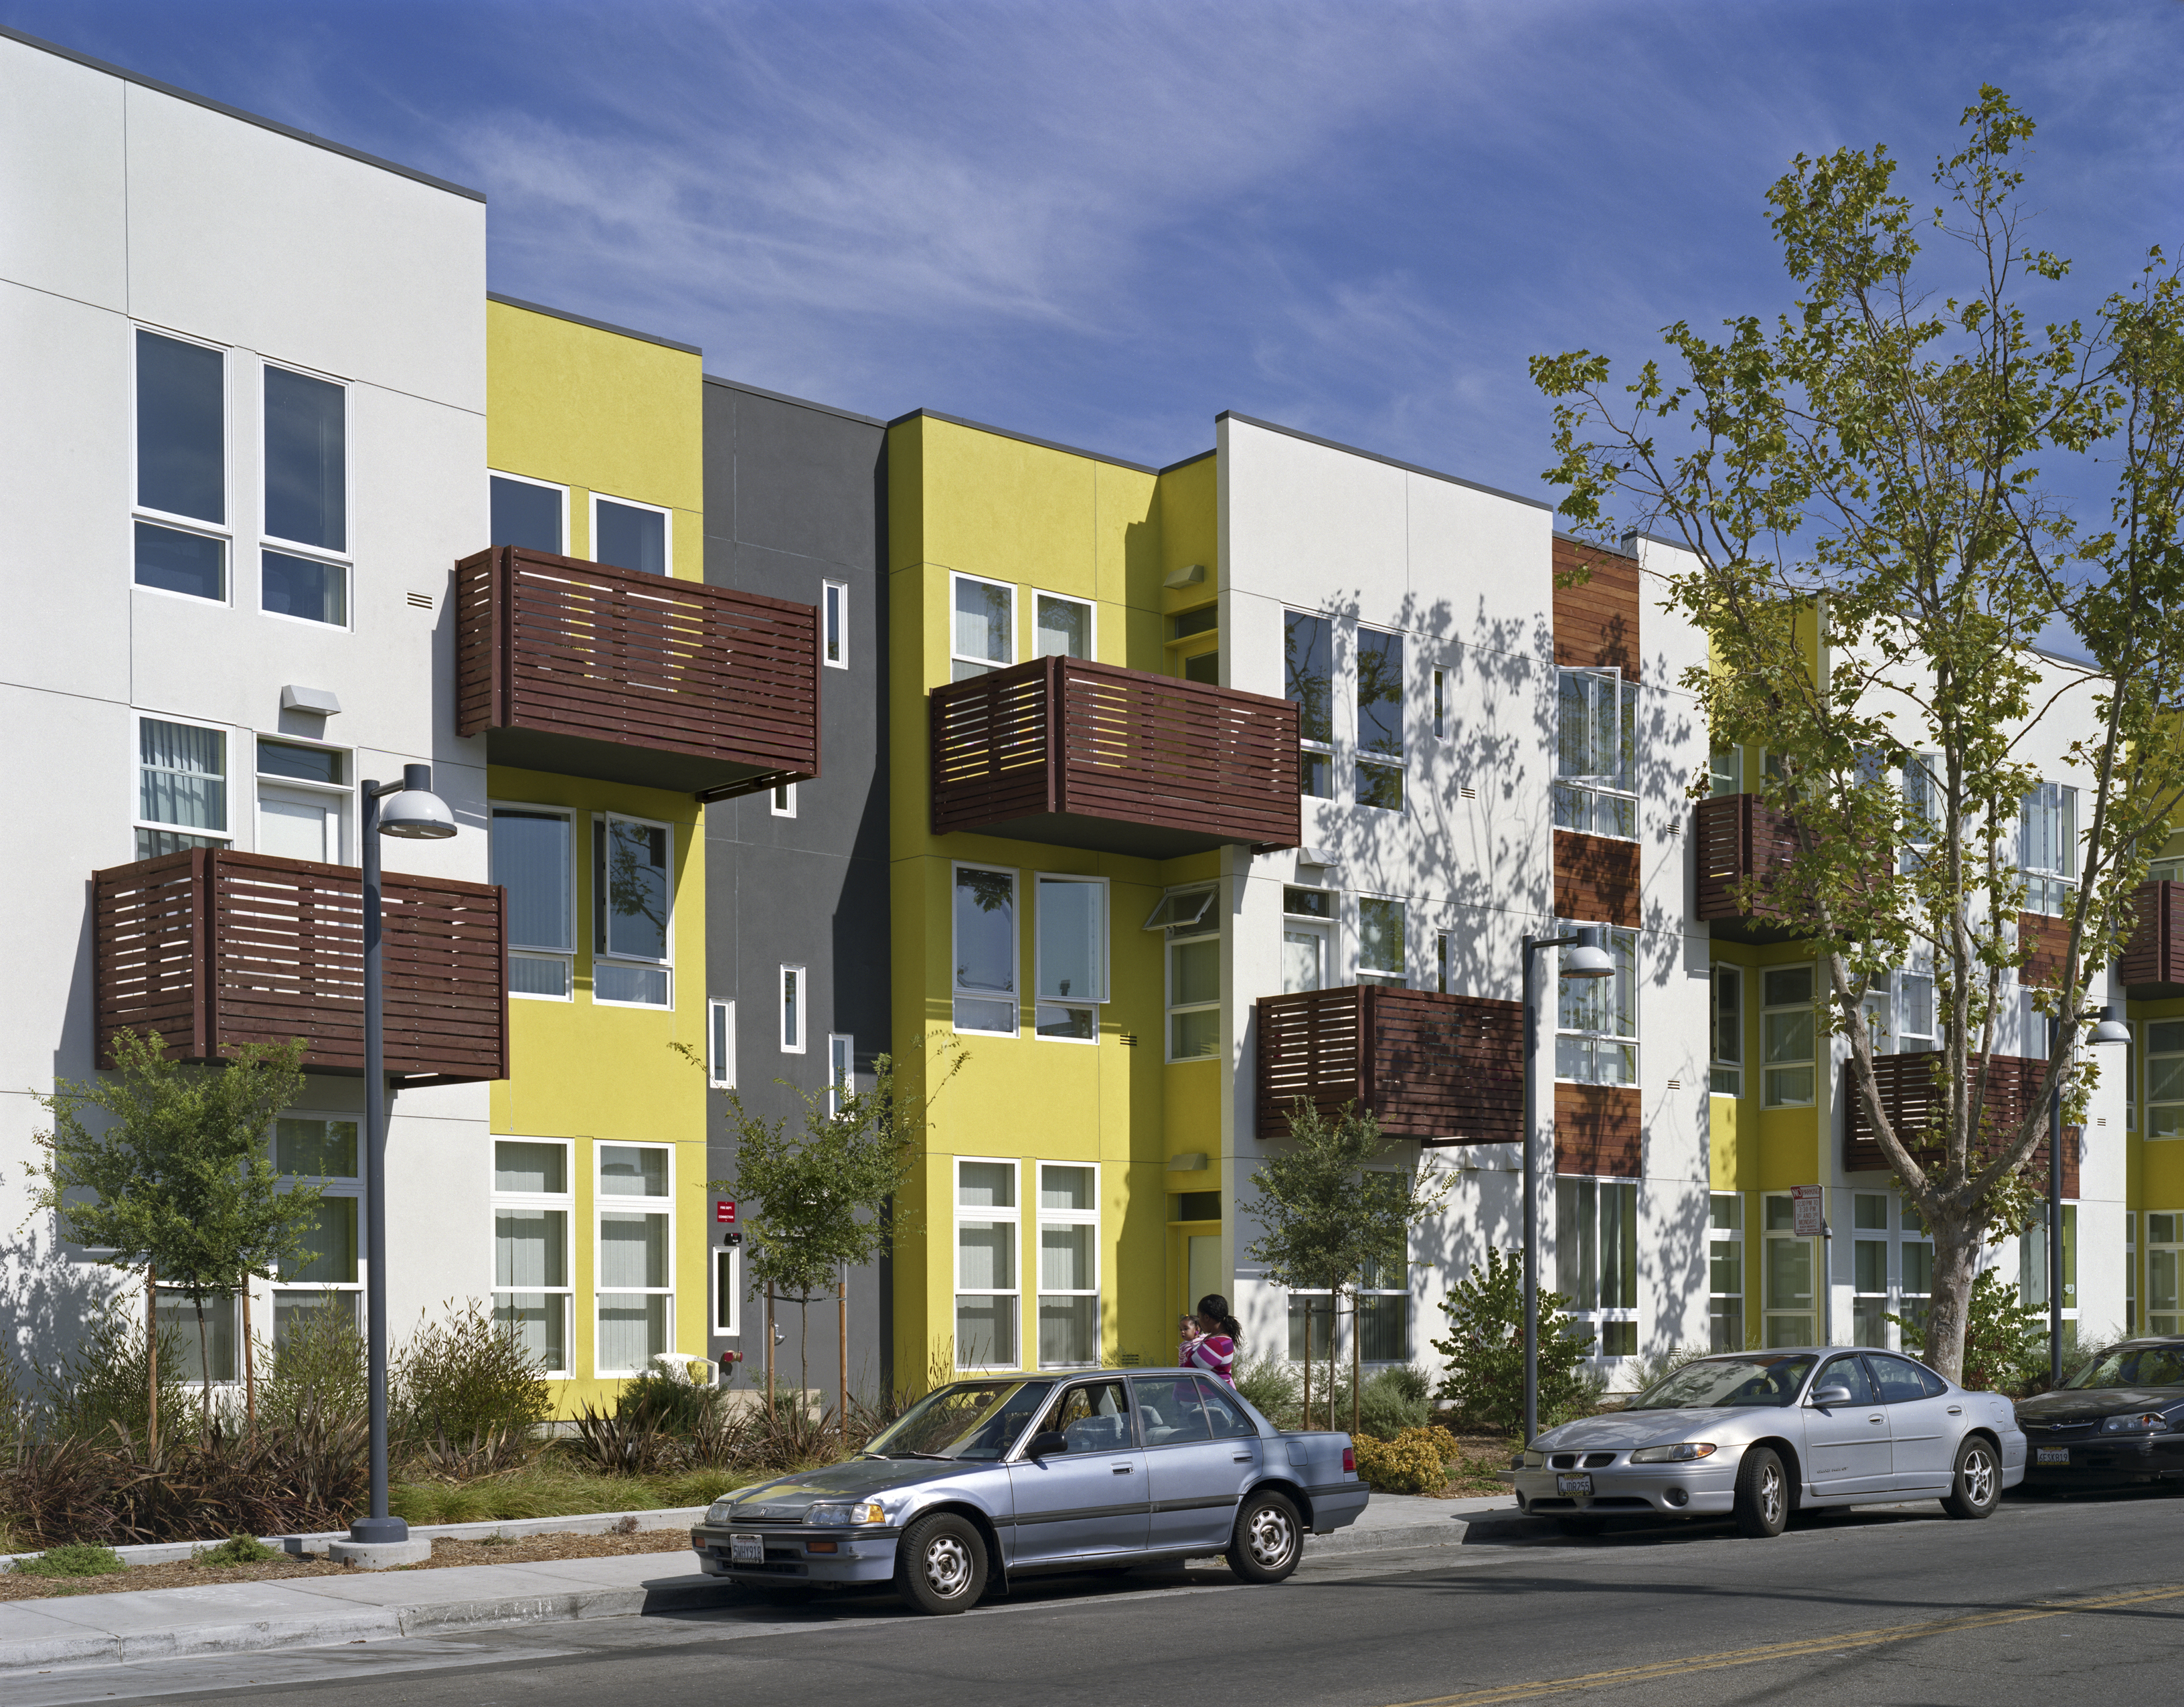 Elevation of apartment building with wood-slat balconies and a planted sidewalk at Tassafaronga Village in East Oakland, CA. 